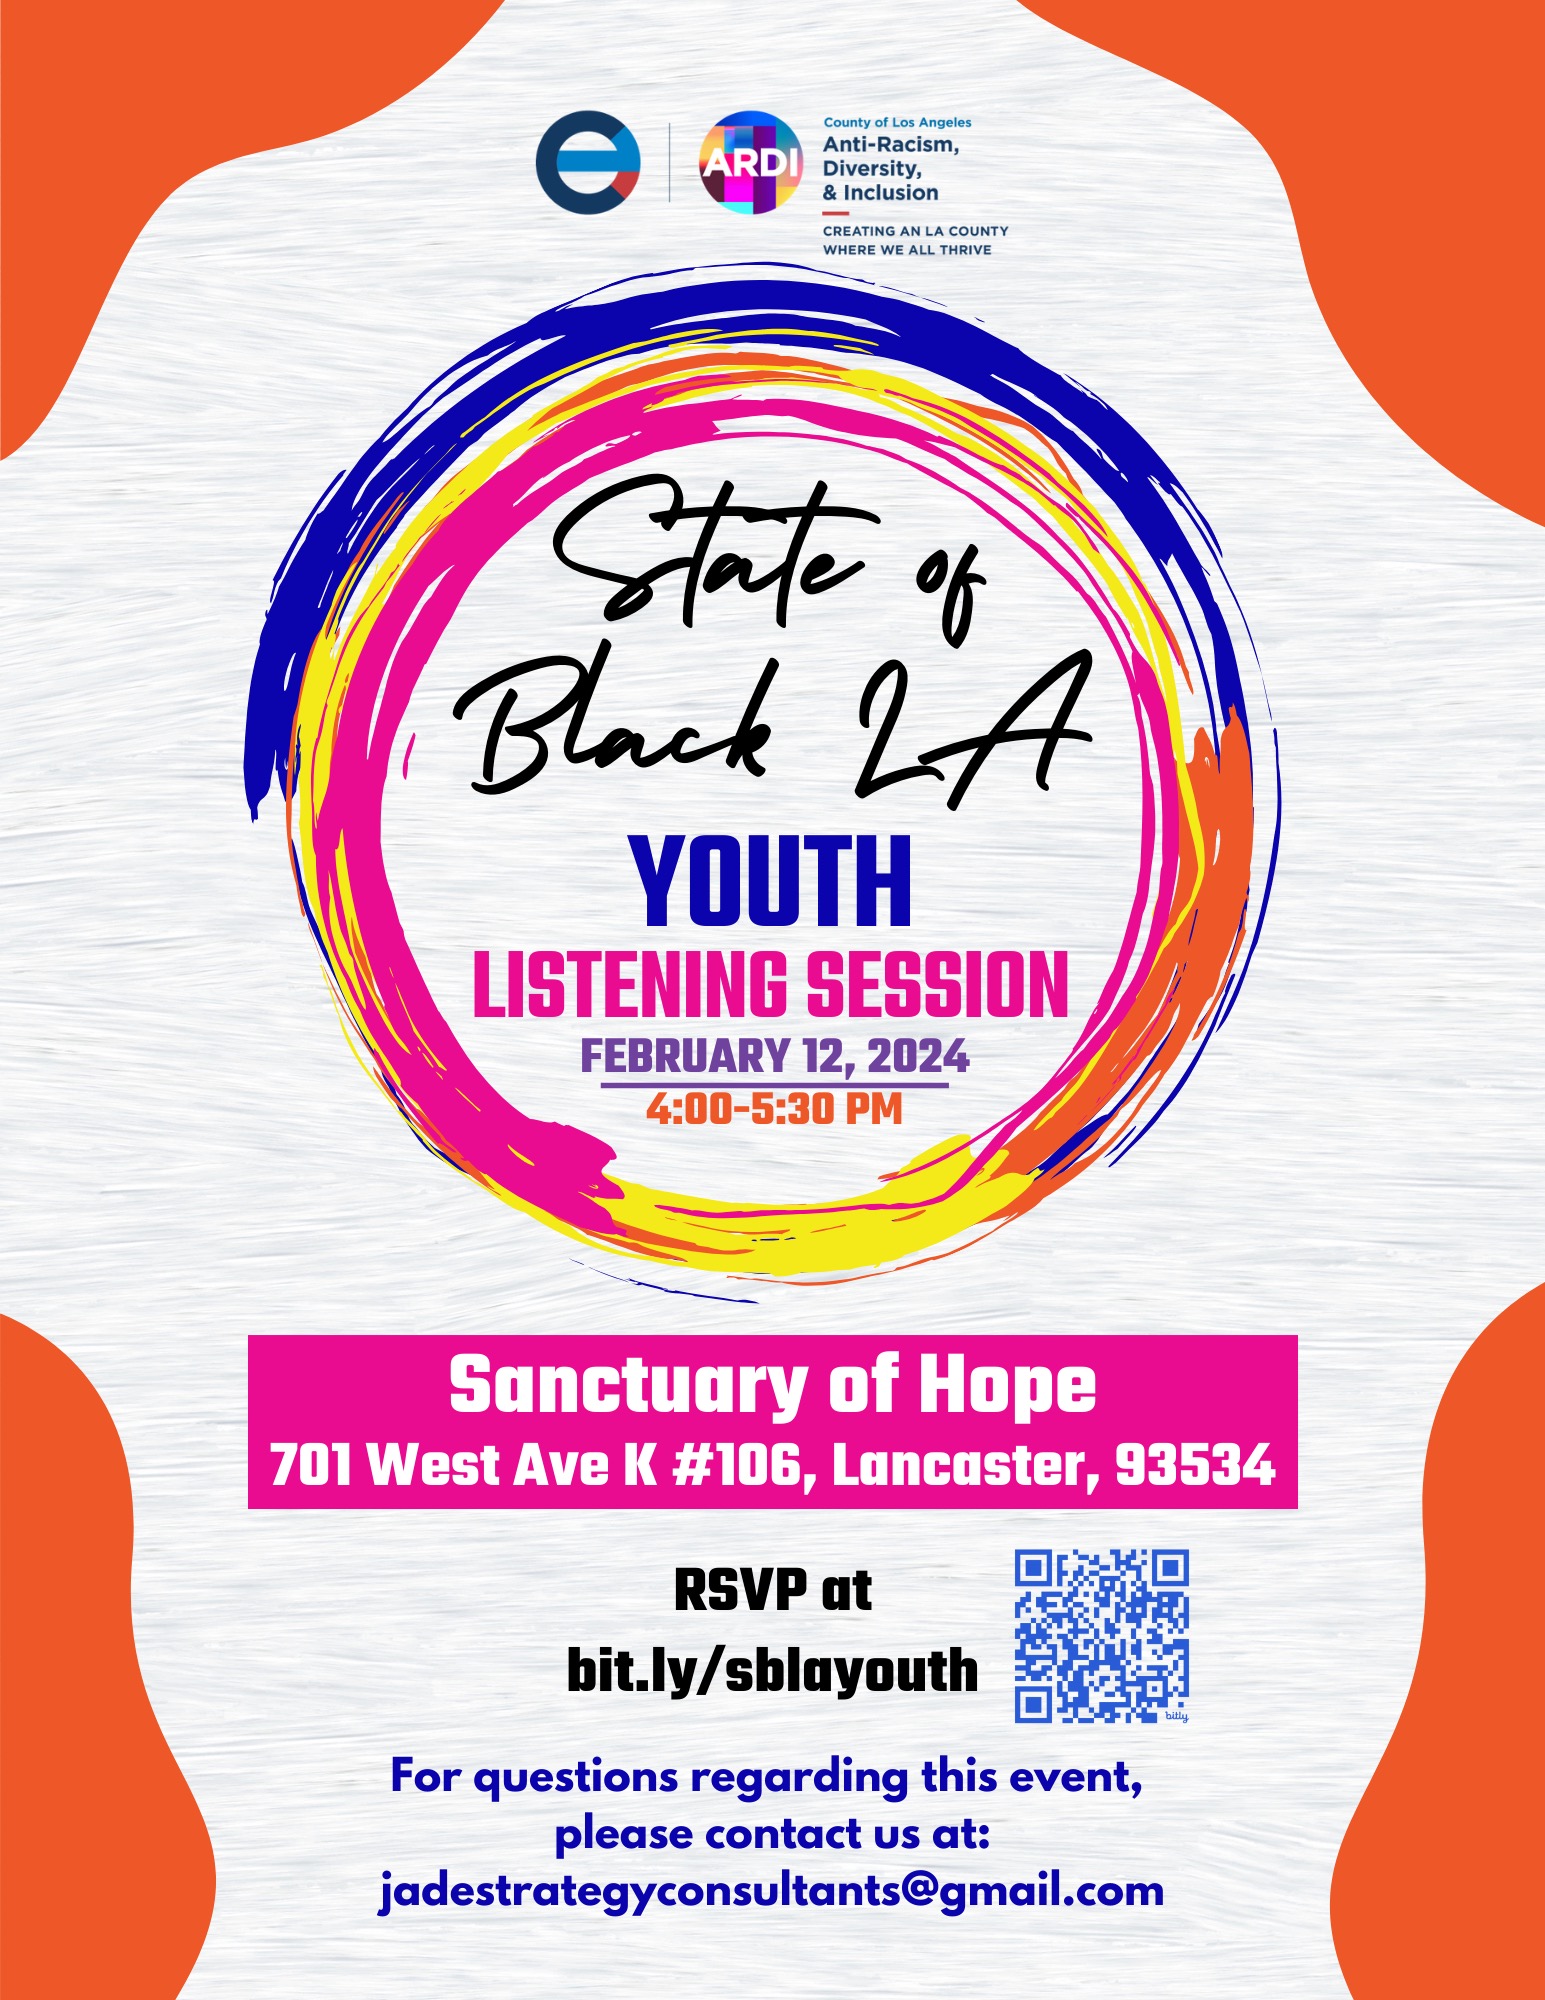 Antelope Valley State of Black LA Youth Listening Session